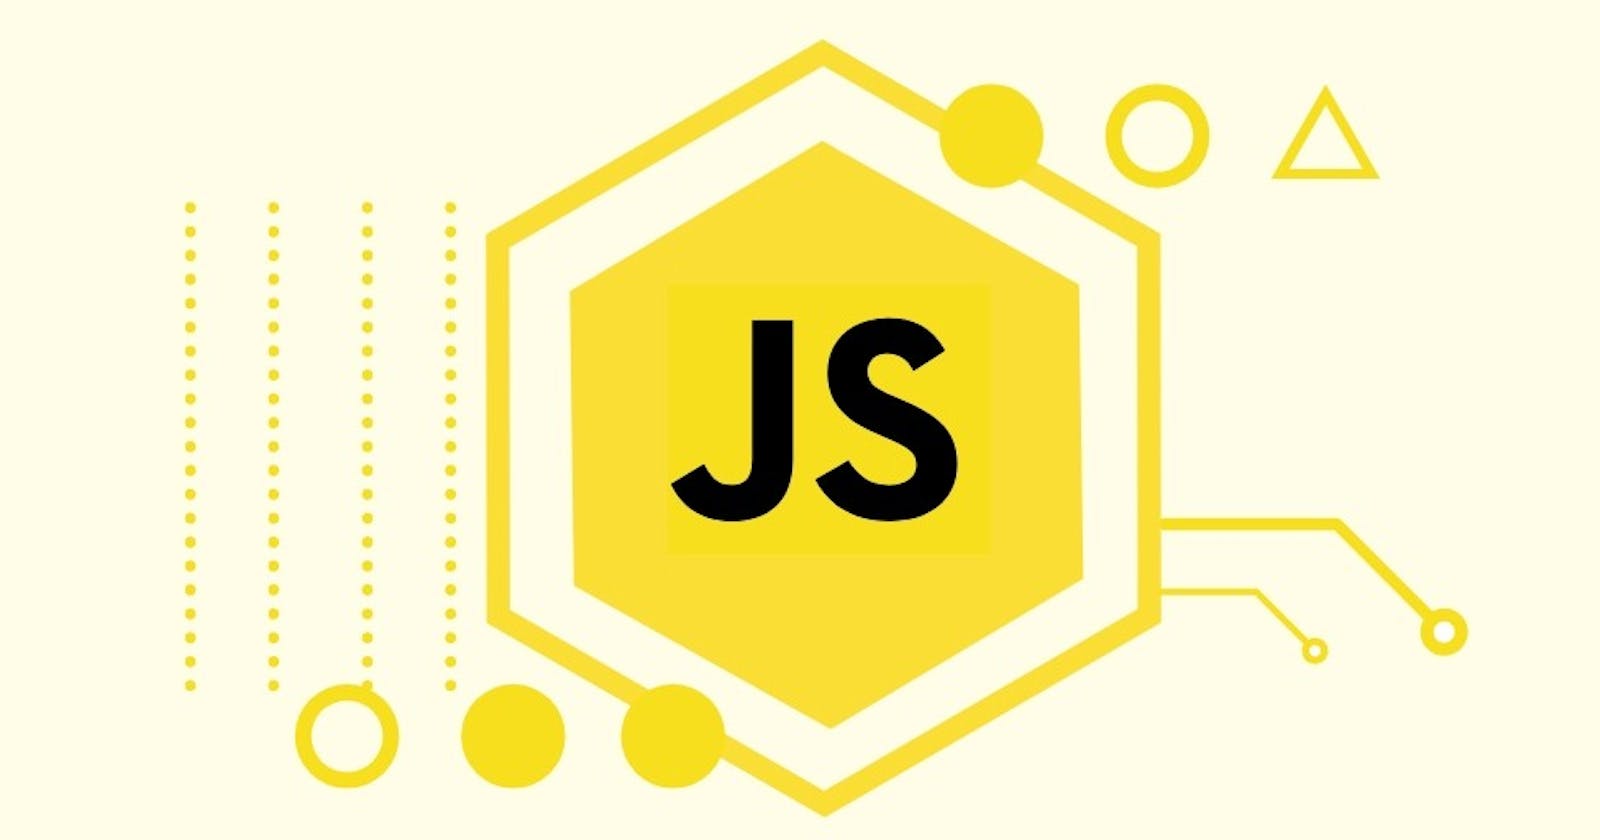 What is JavaScript?